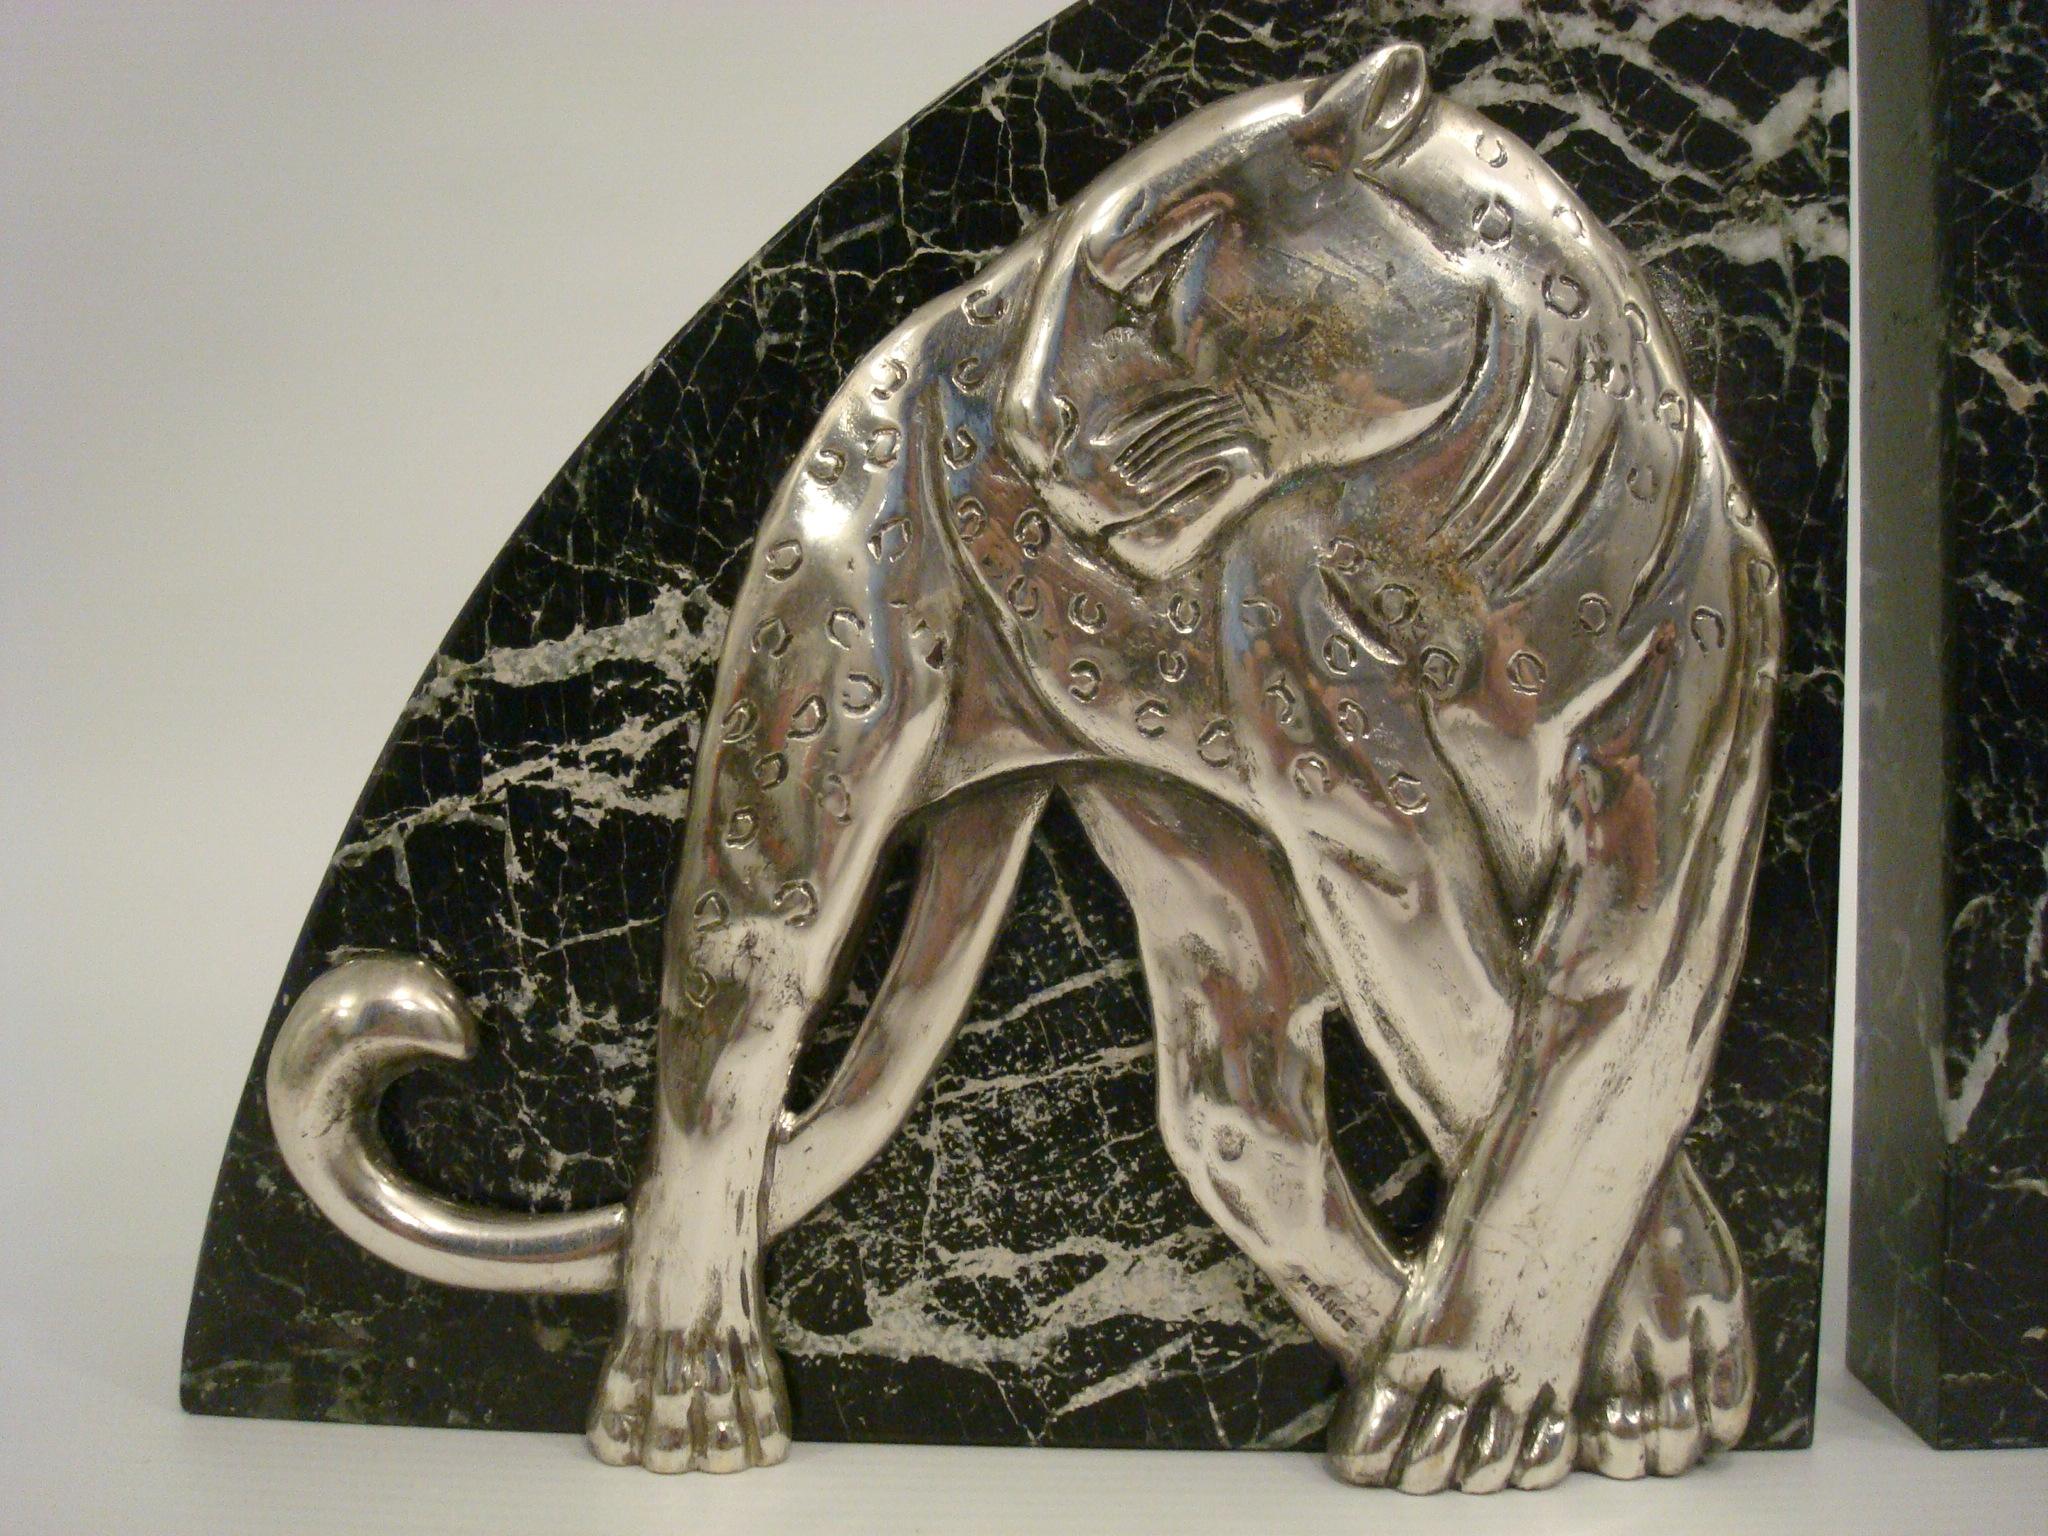 20th Century Art Deco Pair of Panther Bookends, Silvered Bronze and Marble - France, 1920s